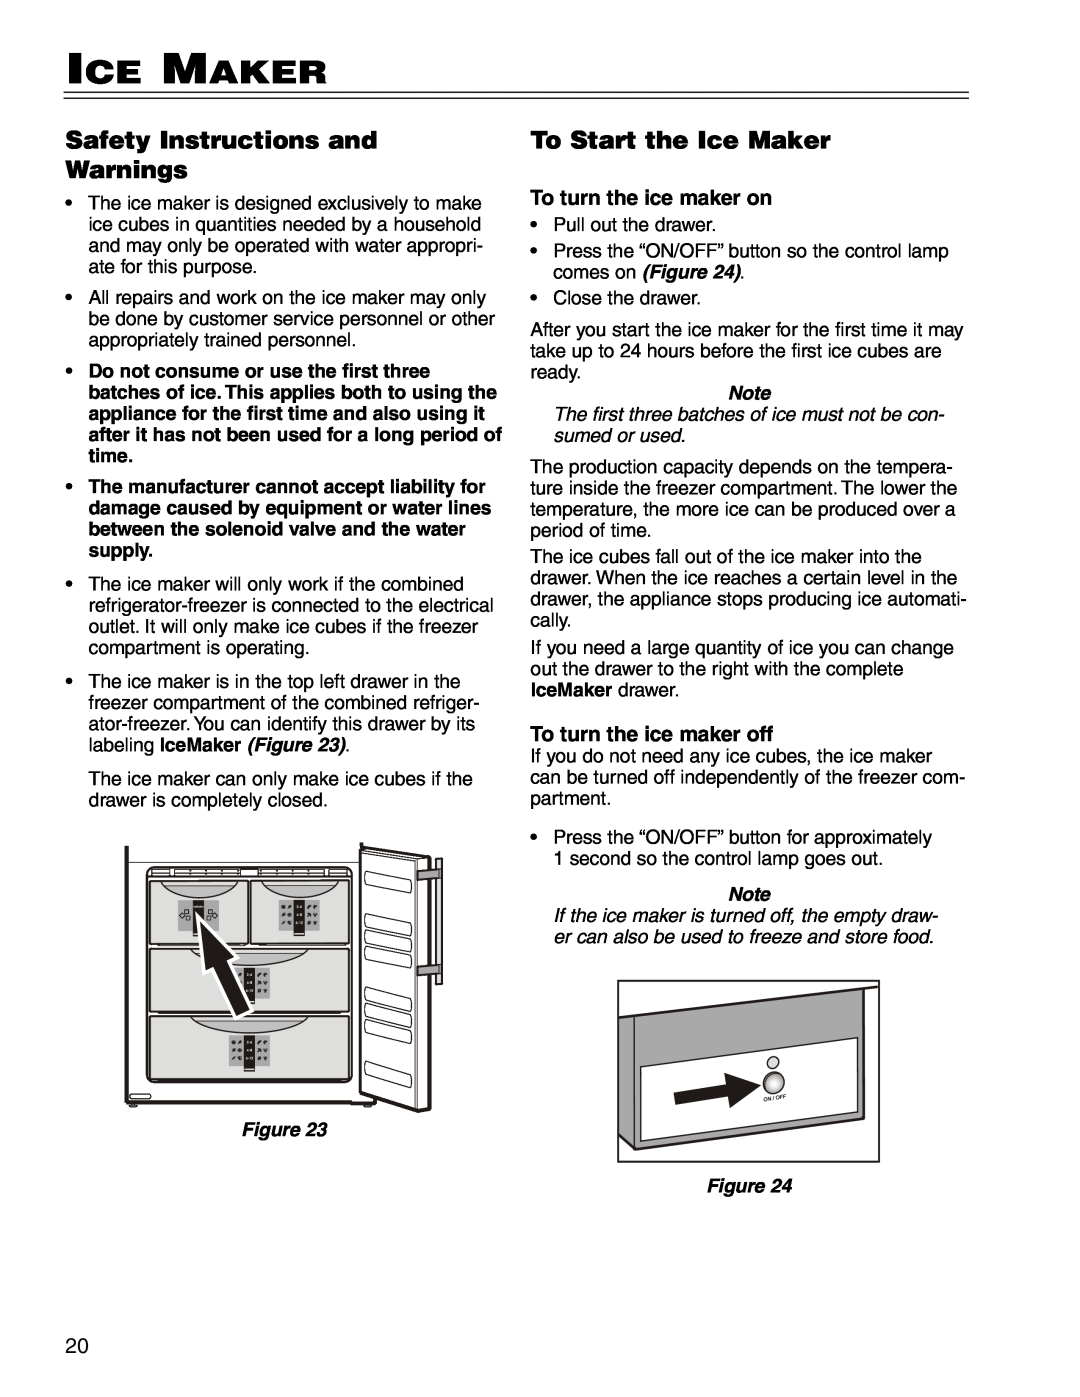 Liebherr CS 1660 manual Safety Instructions and Warnings, To Start the Ice Maker, To turn the ice maker on 